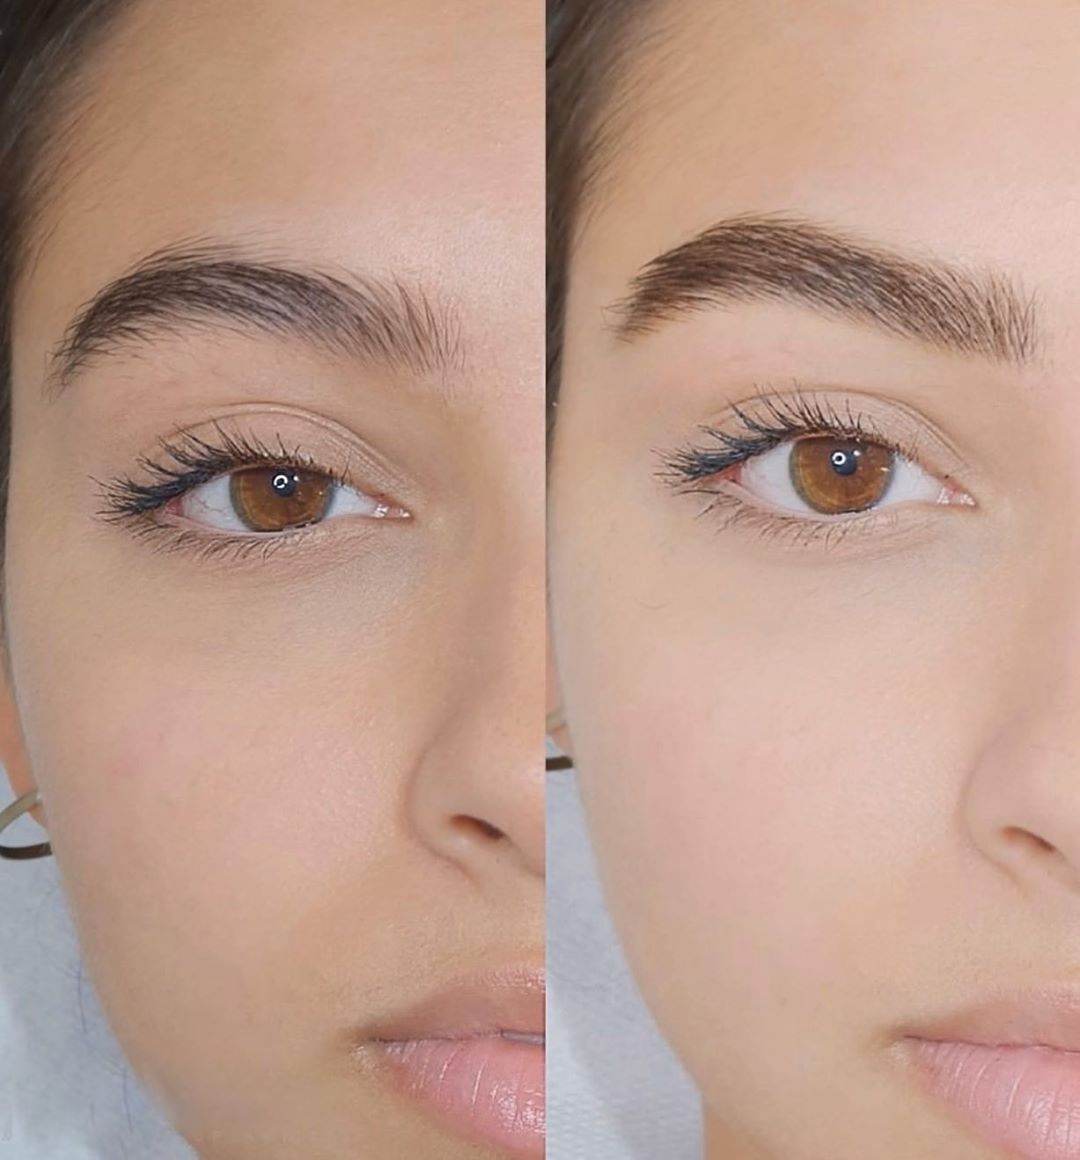 What do you understand by Microblading